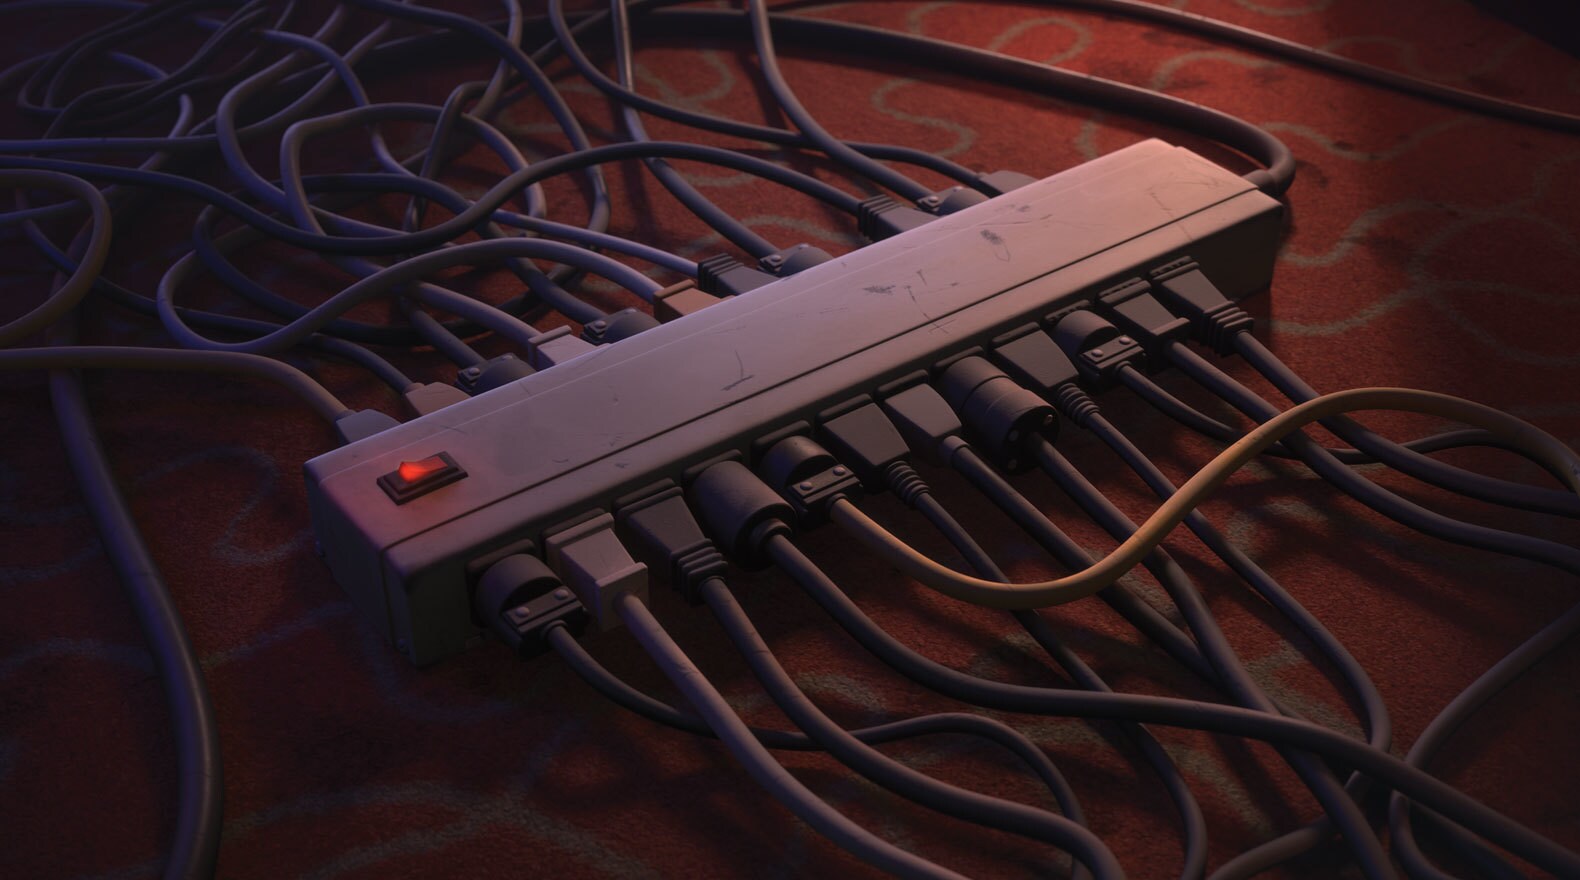 A surge protector full of cords/plugged in games in "Wreck-It Ralph"